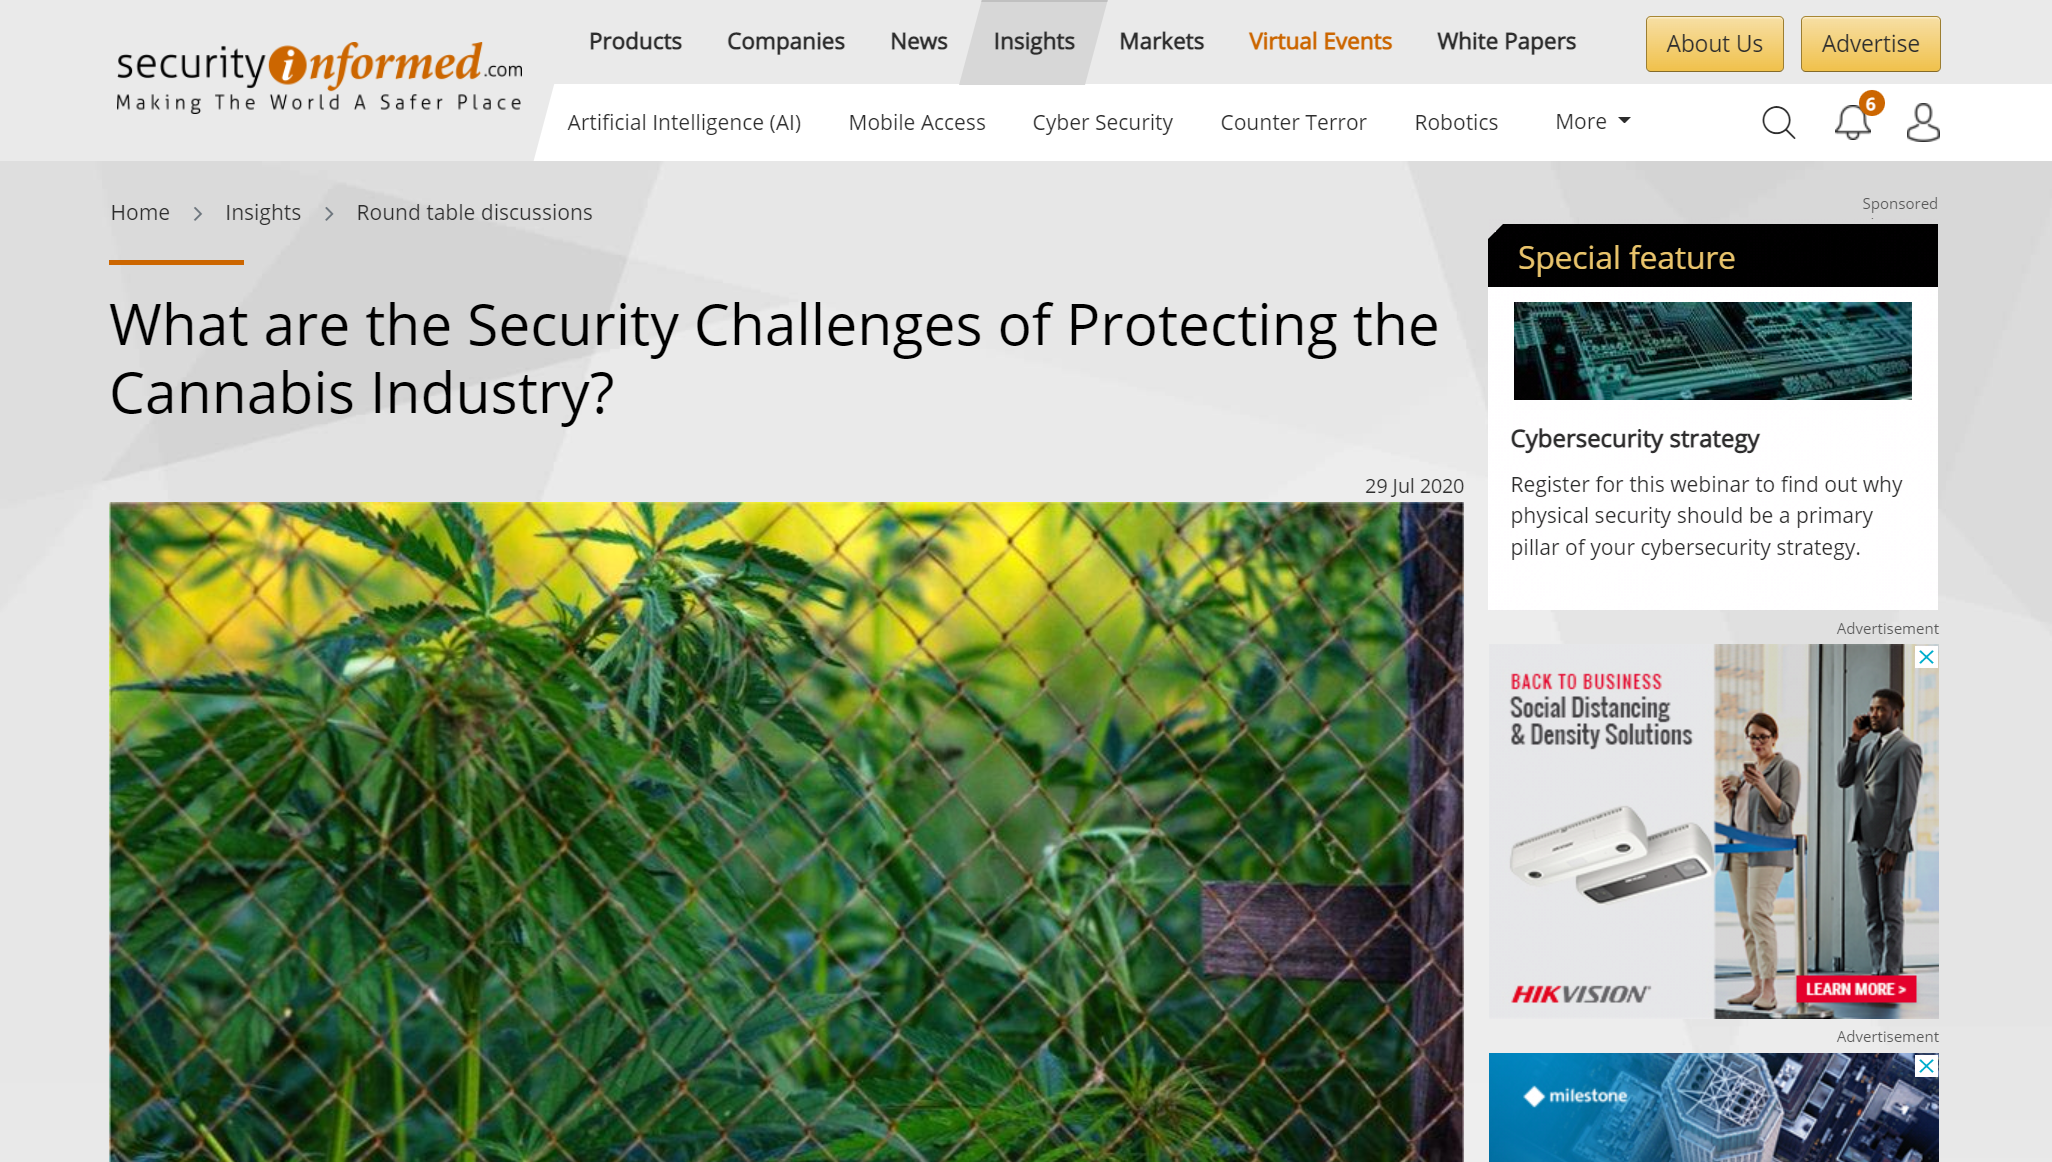 What are the Security Challenges of Protecting the Cannabis Industry